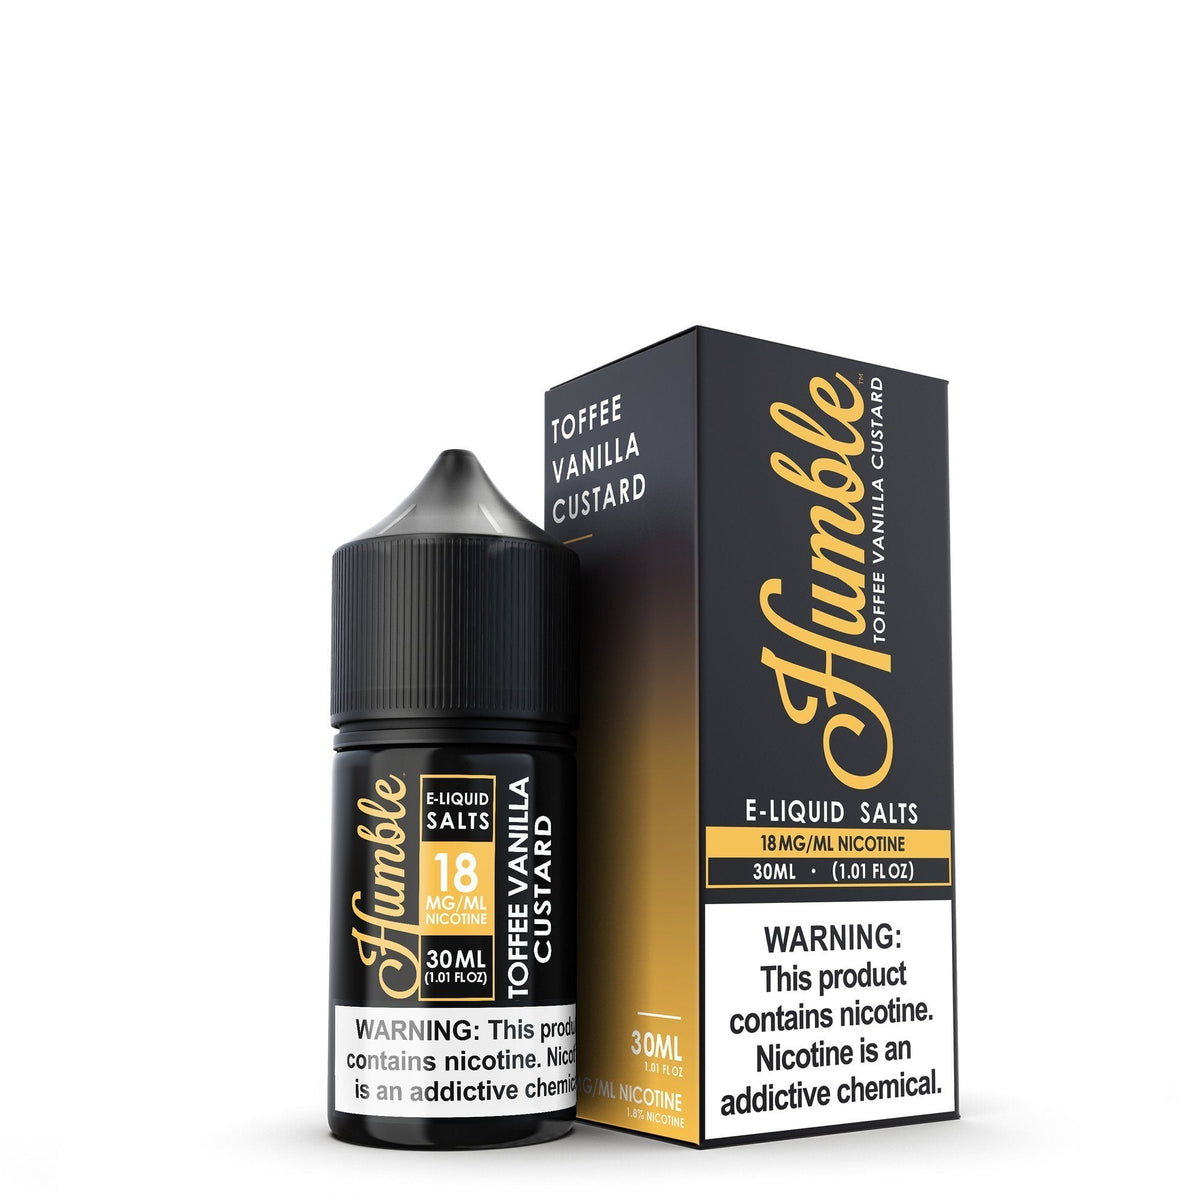 Toffee Vanilla Custard by Humble Salts 30ml with Packaging